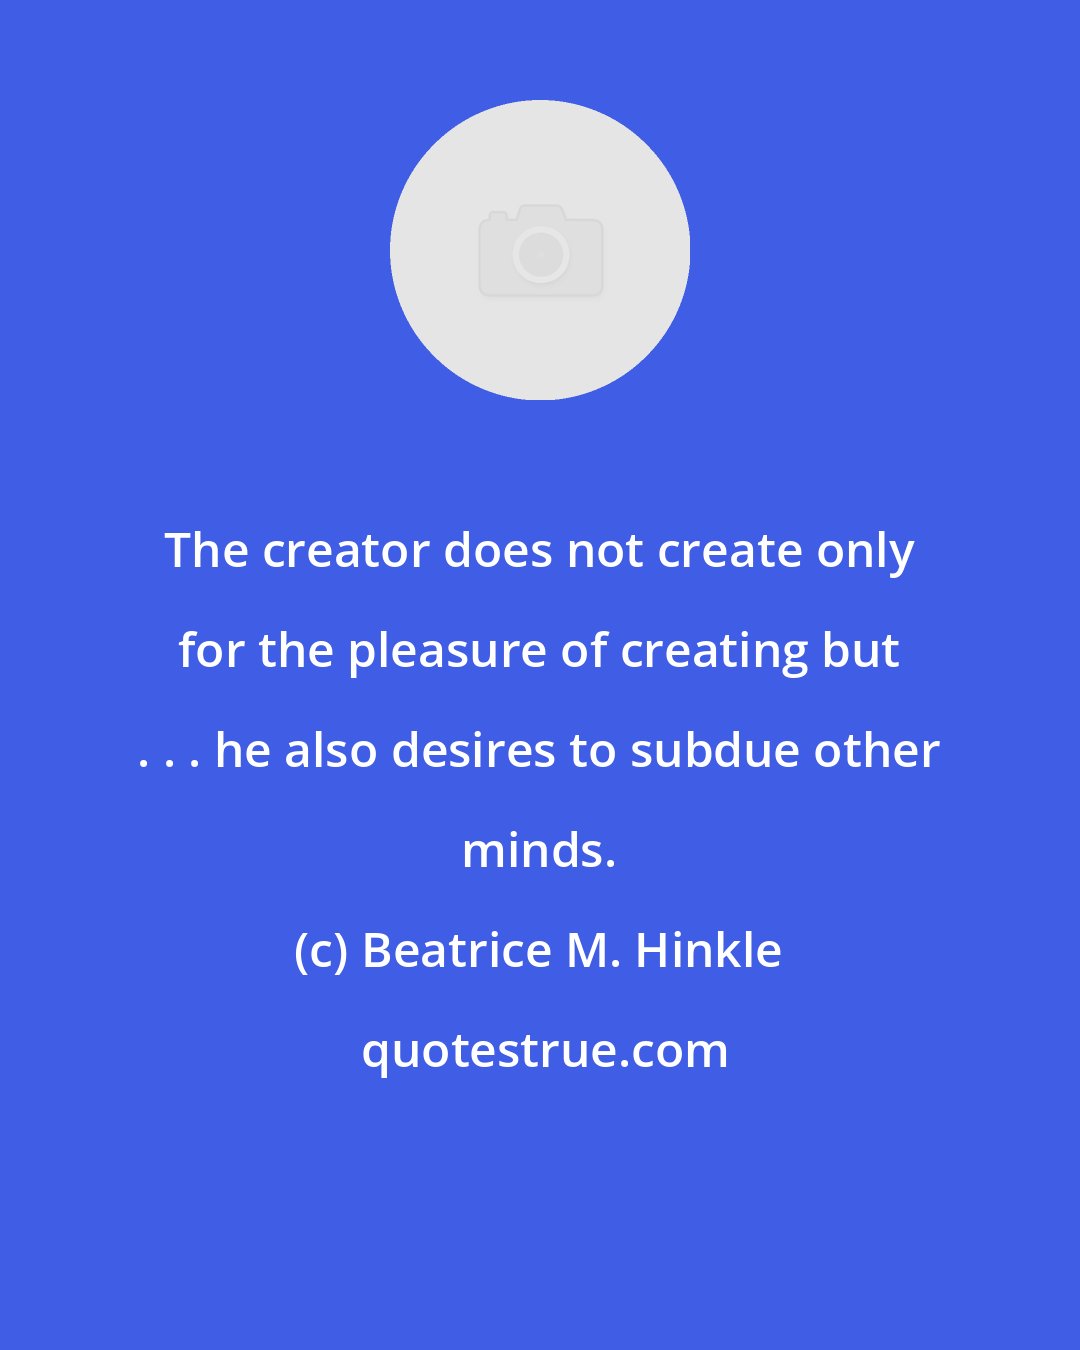 Beatrice M. Hinkle: The creator does not create only for the pleasure of creating but . . . he also desires to subdue other minds.